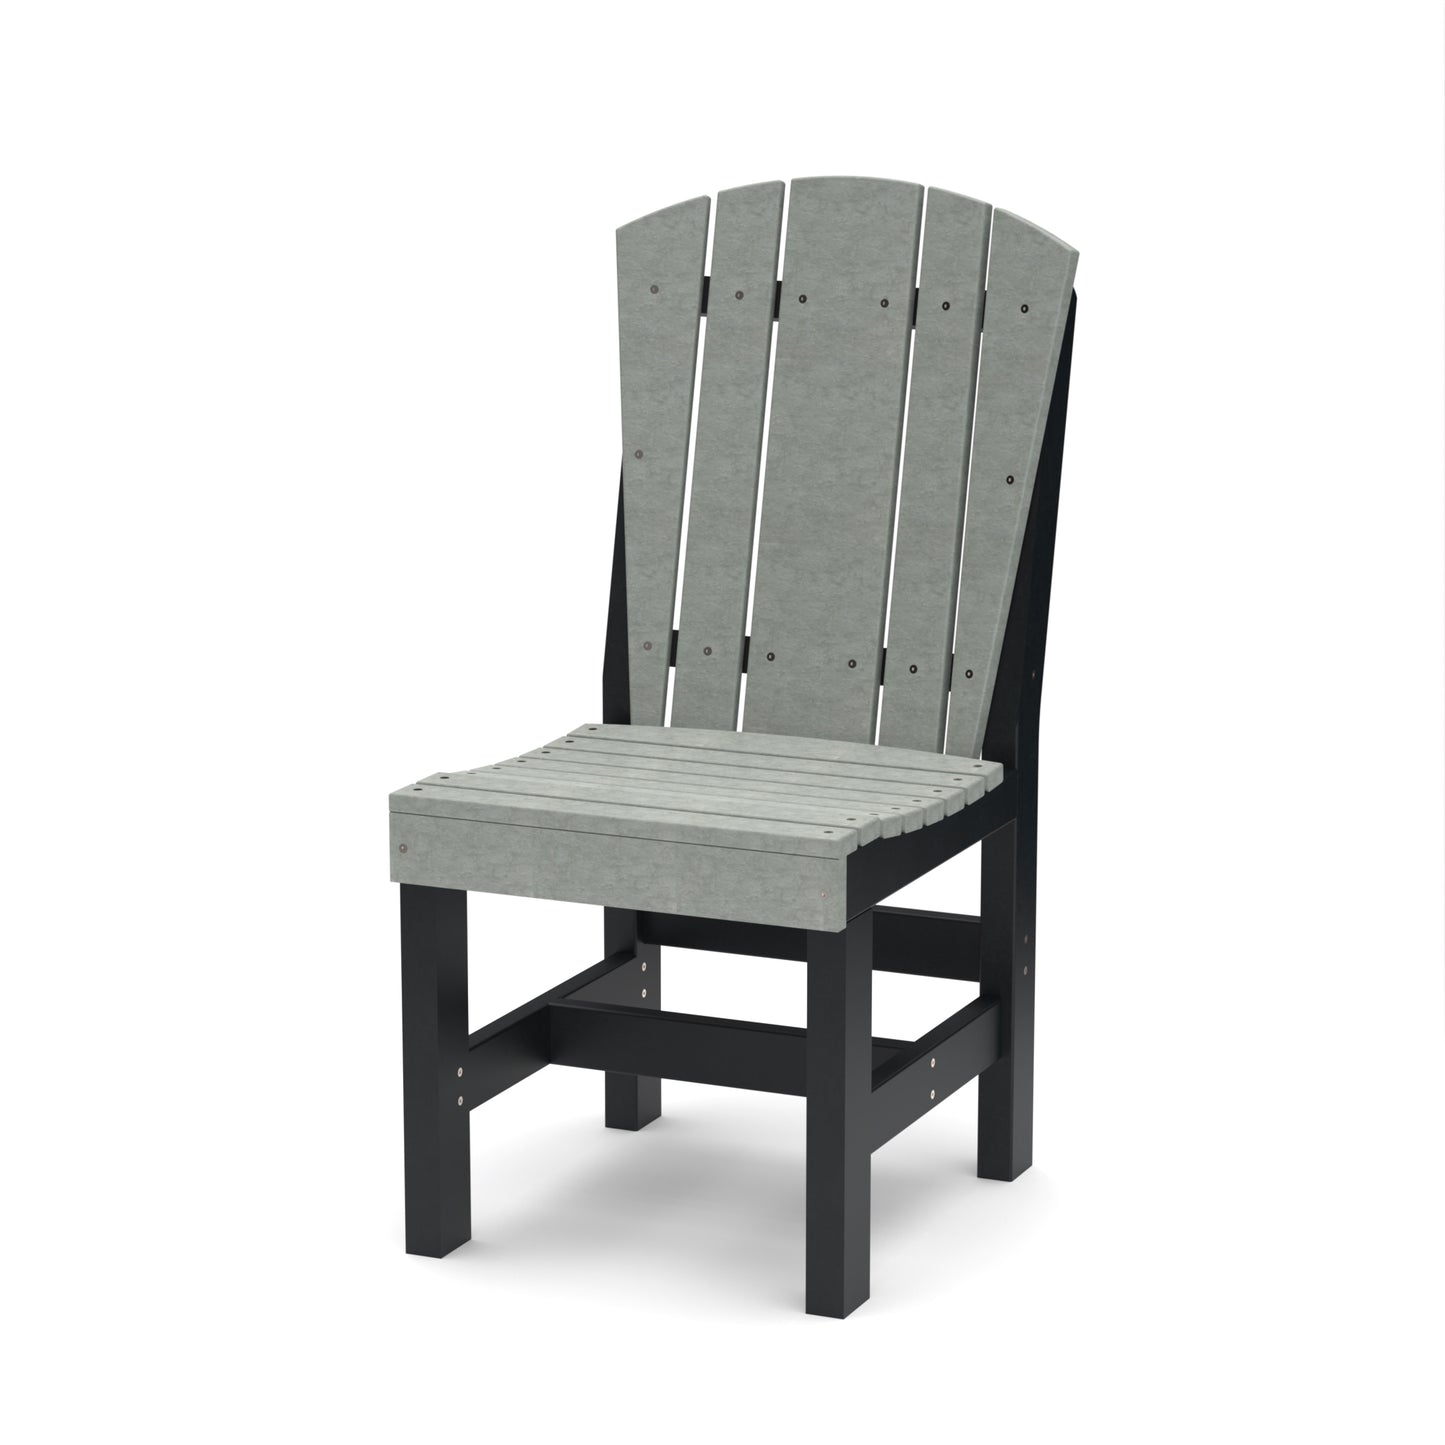 Wildridge Recycled Plastic Heritage Outdoor Dining Chair - LEAD TIME TO SHIP 6 WEEKS OR LESS